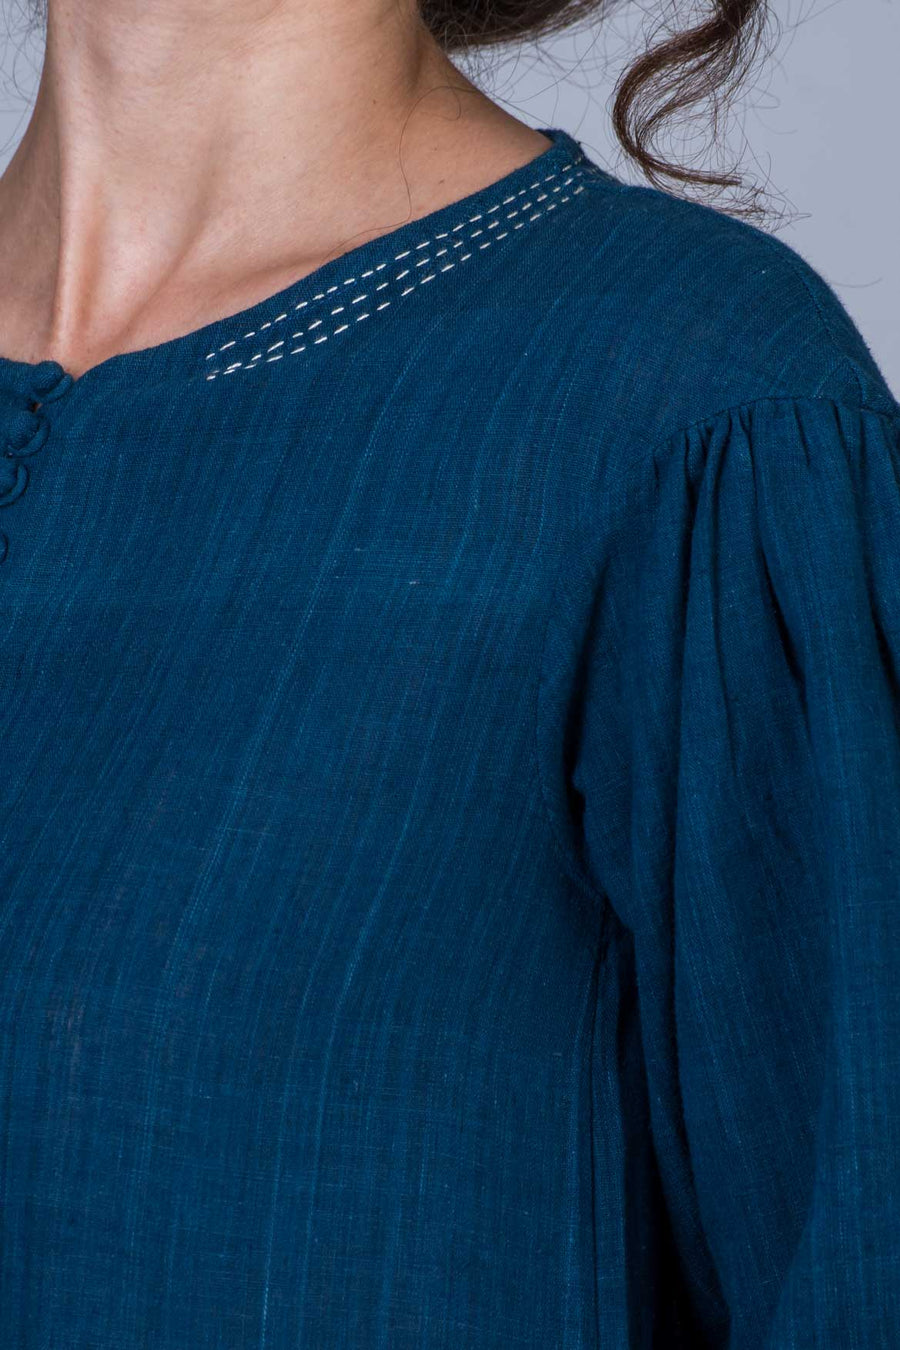 Indigo Dyed Handwoven Top - WHICH